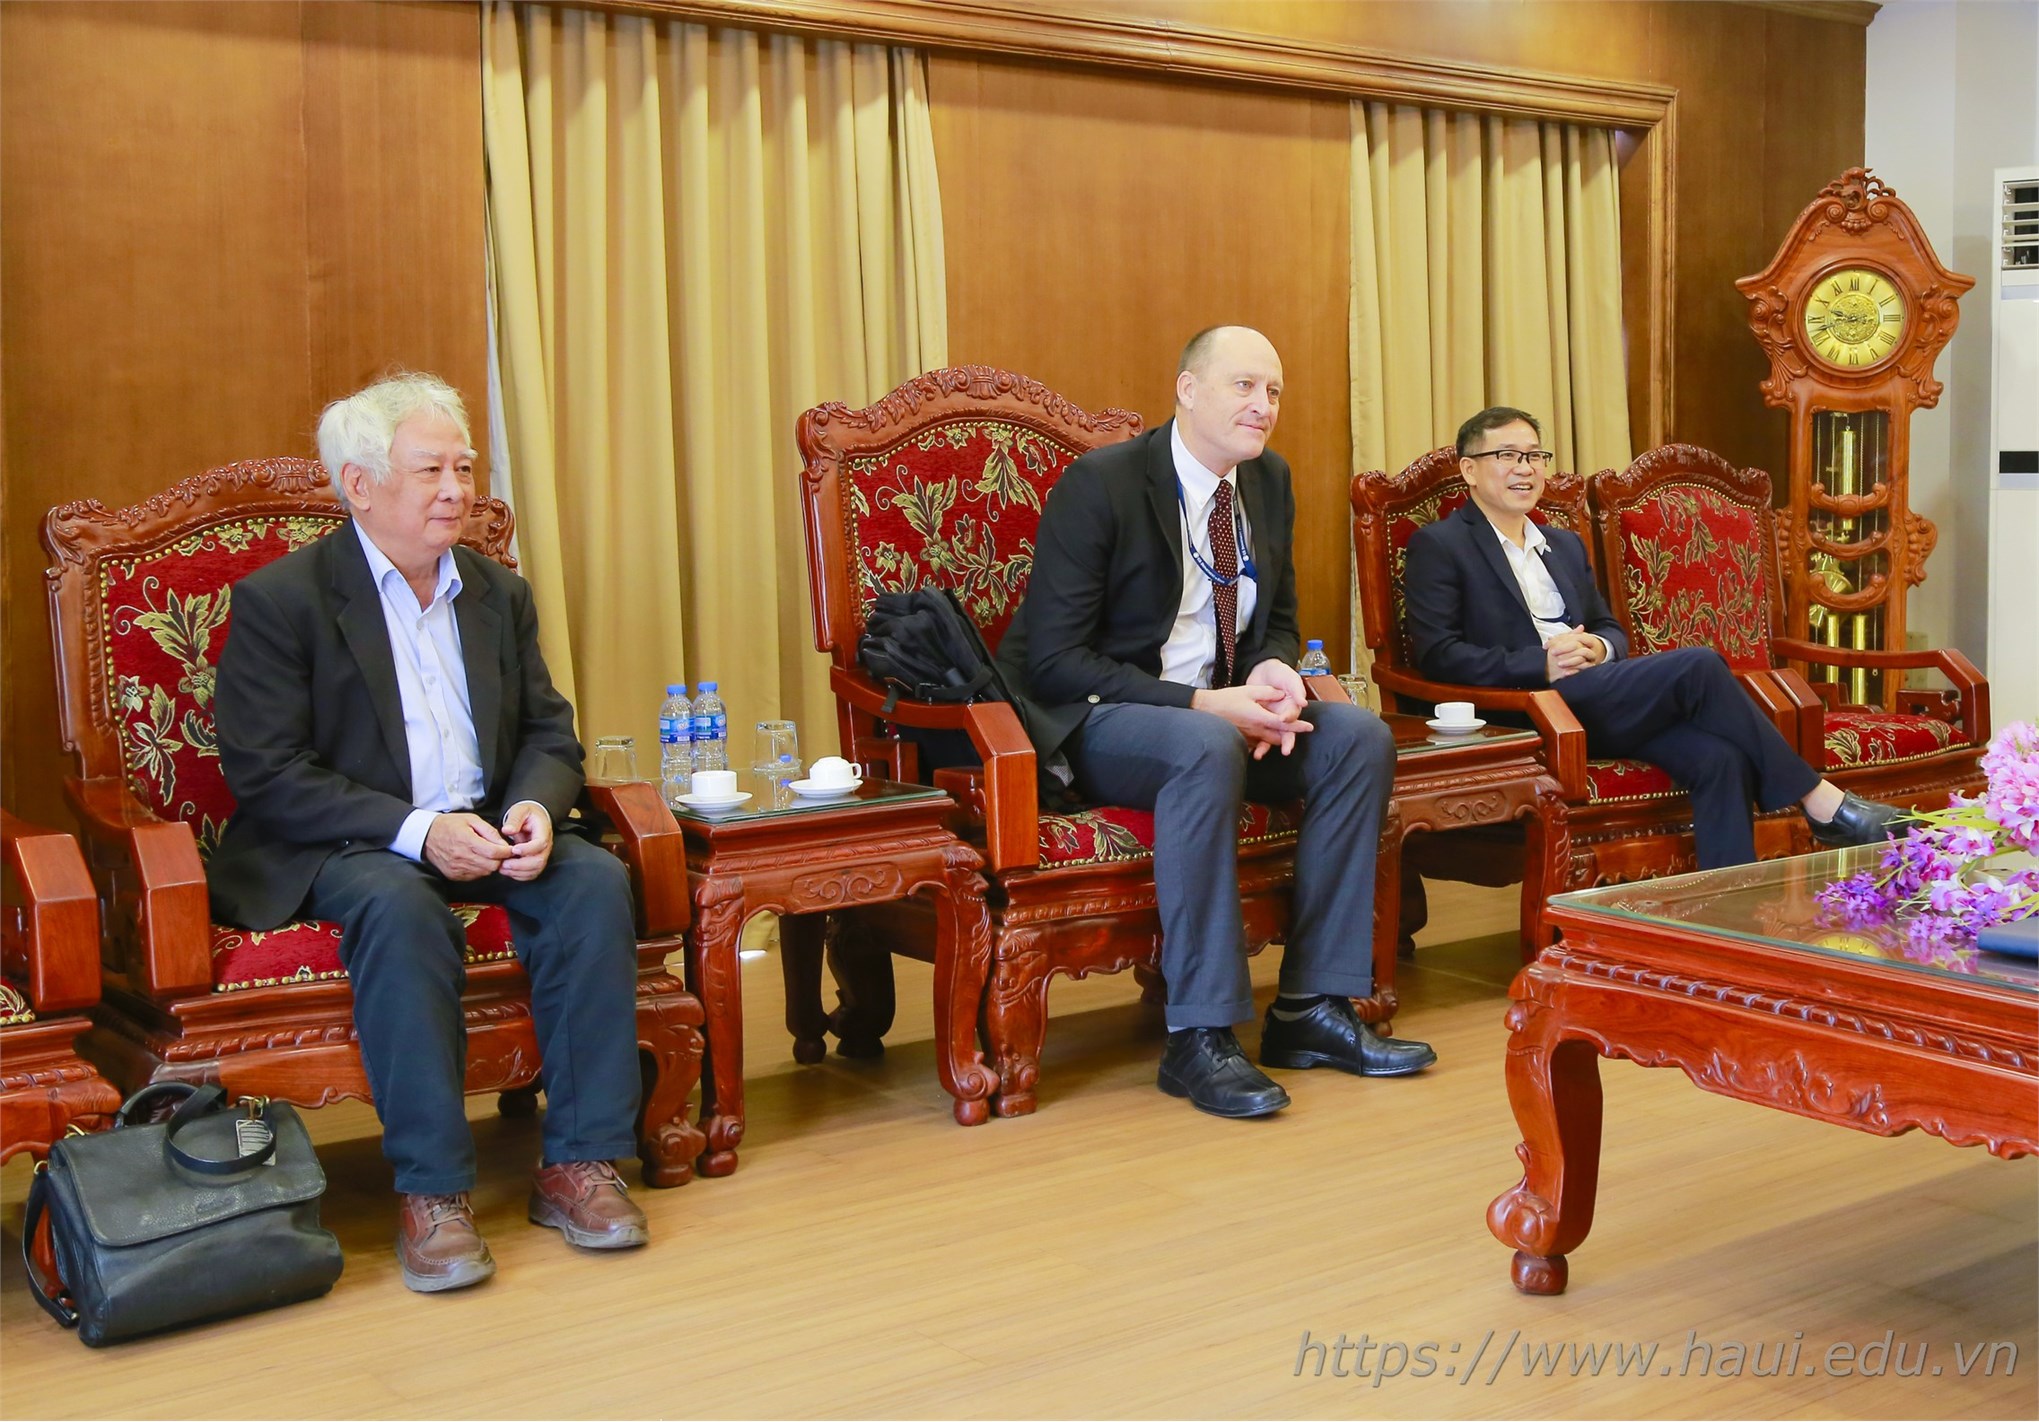 Director of the Regional English Language Office - The U.S. Embassy in Vietnam paid a working visit to HaUI